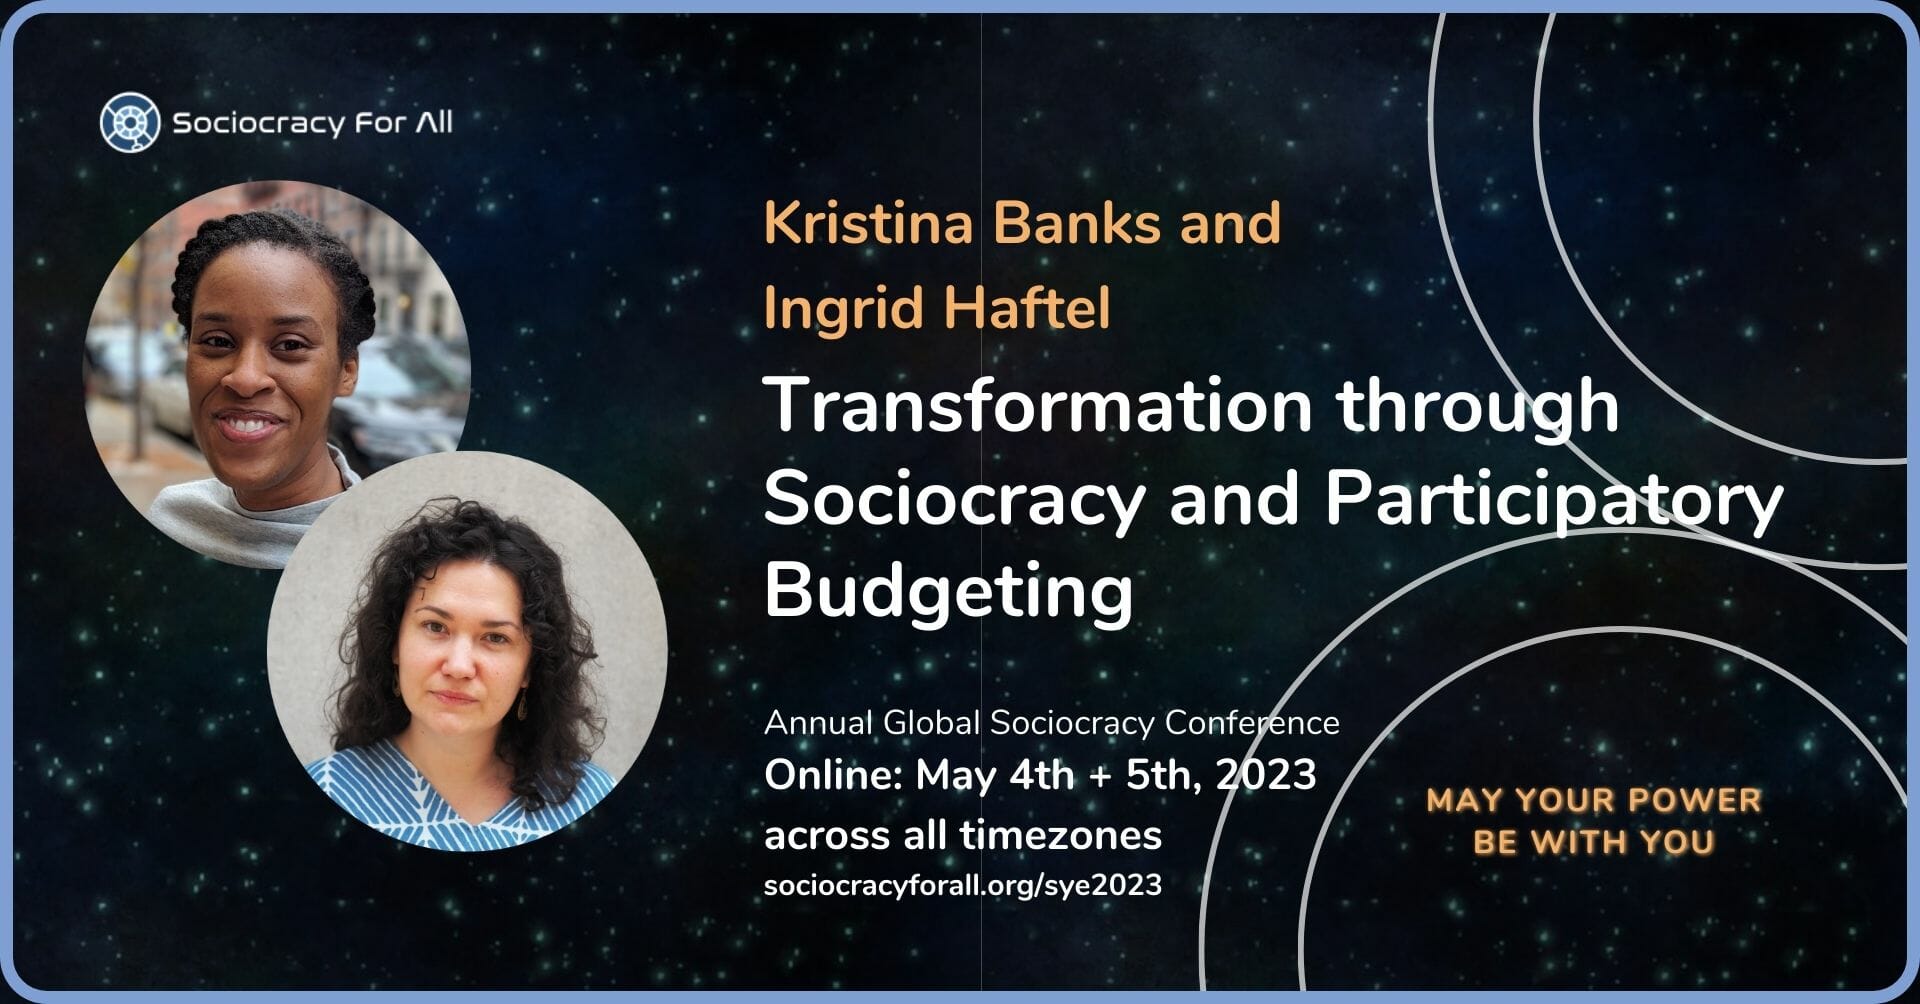 Transformation through Sociocracy and Participatory Budgeting